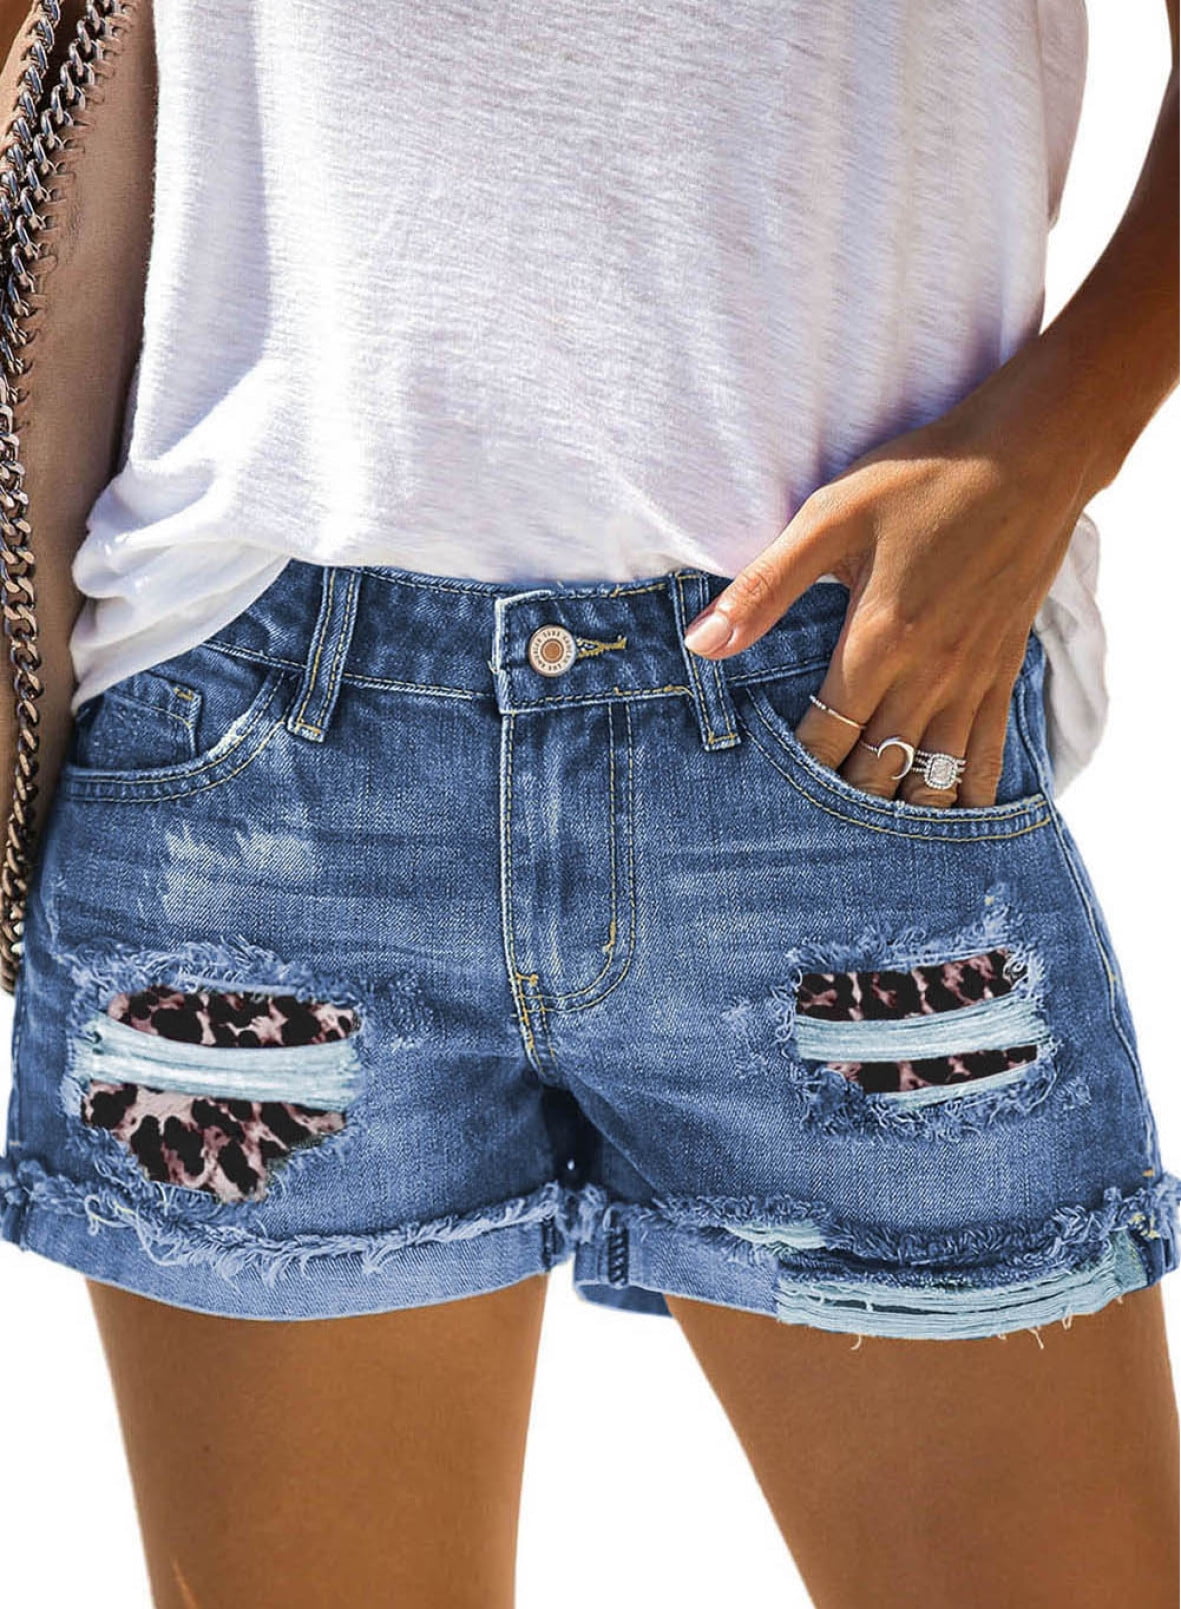 Shakumy Women Frayed Denim Jean Shorts Casual Summer Beach Comfy Stretchy Mid Rise Ripped Distressed Jeans Shorts Hot Pants